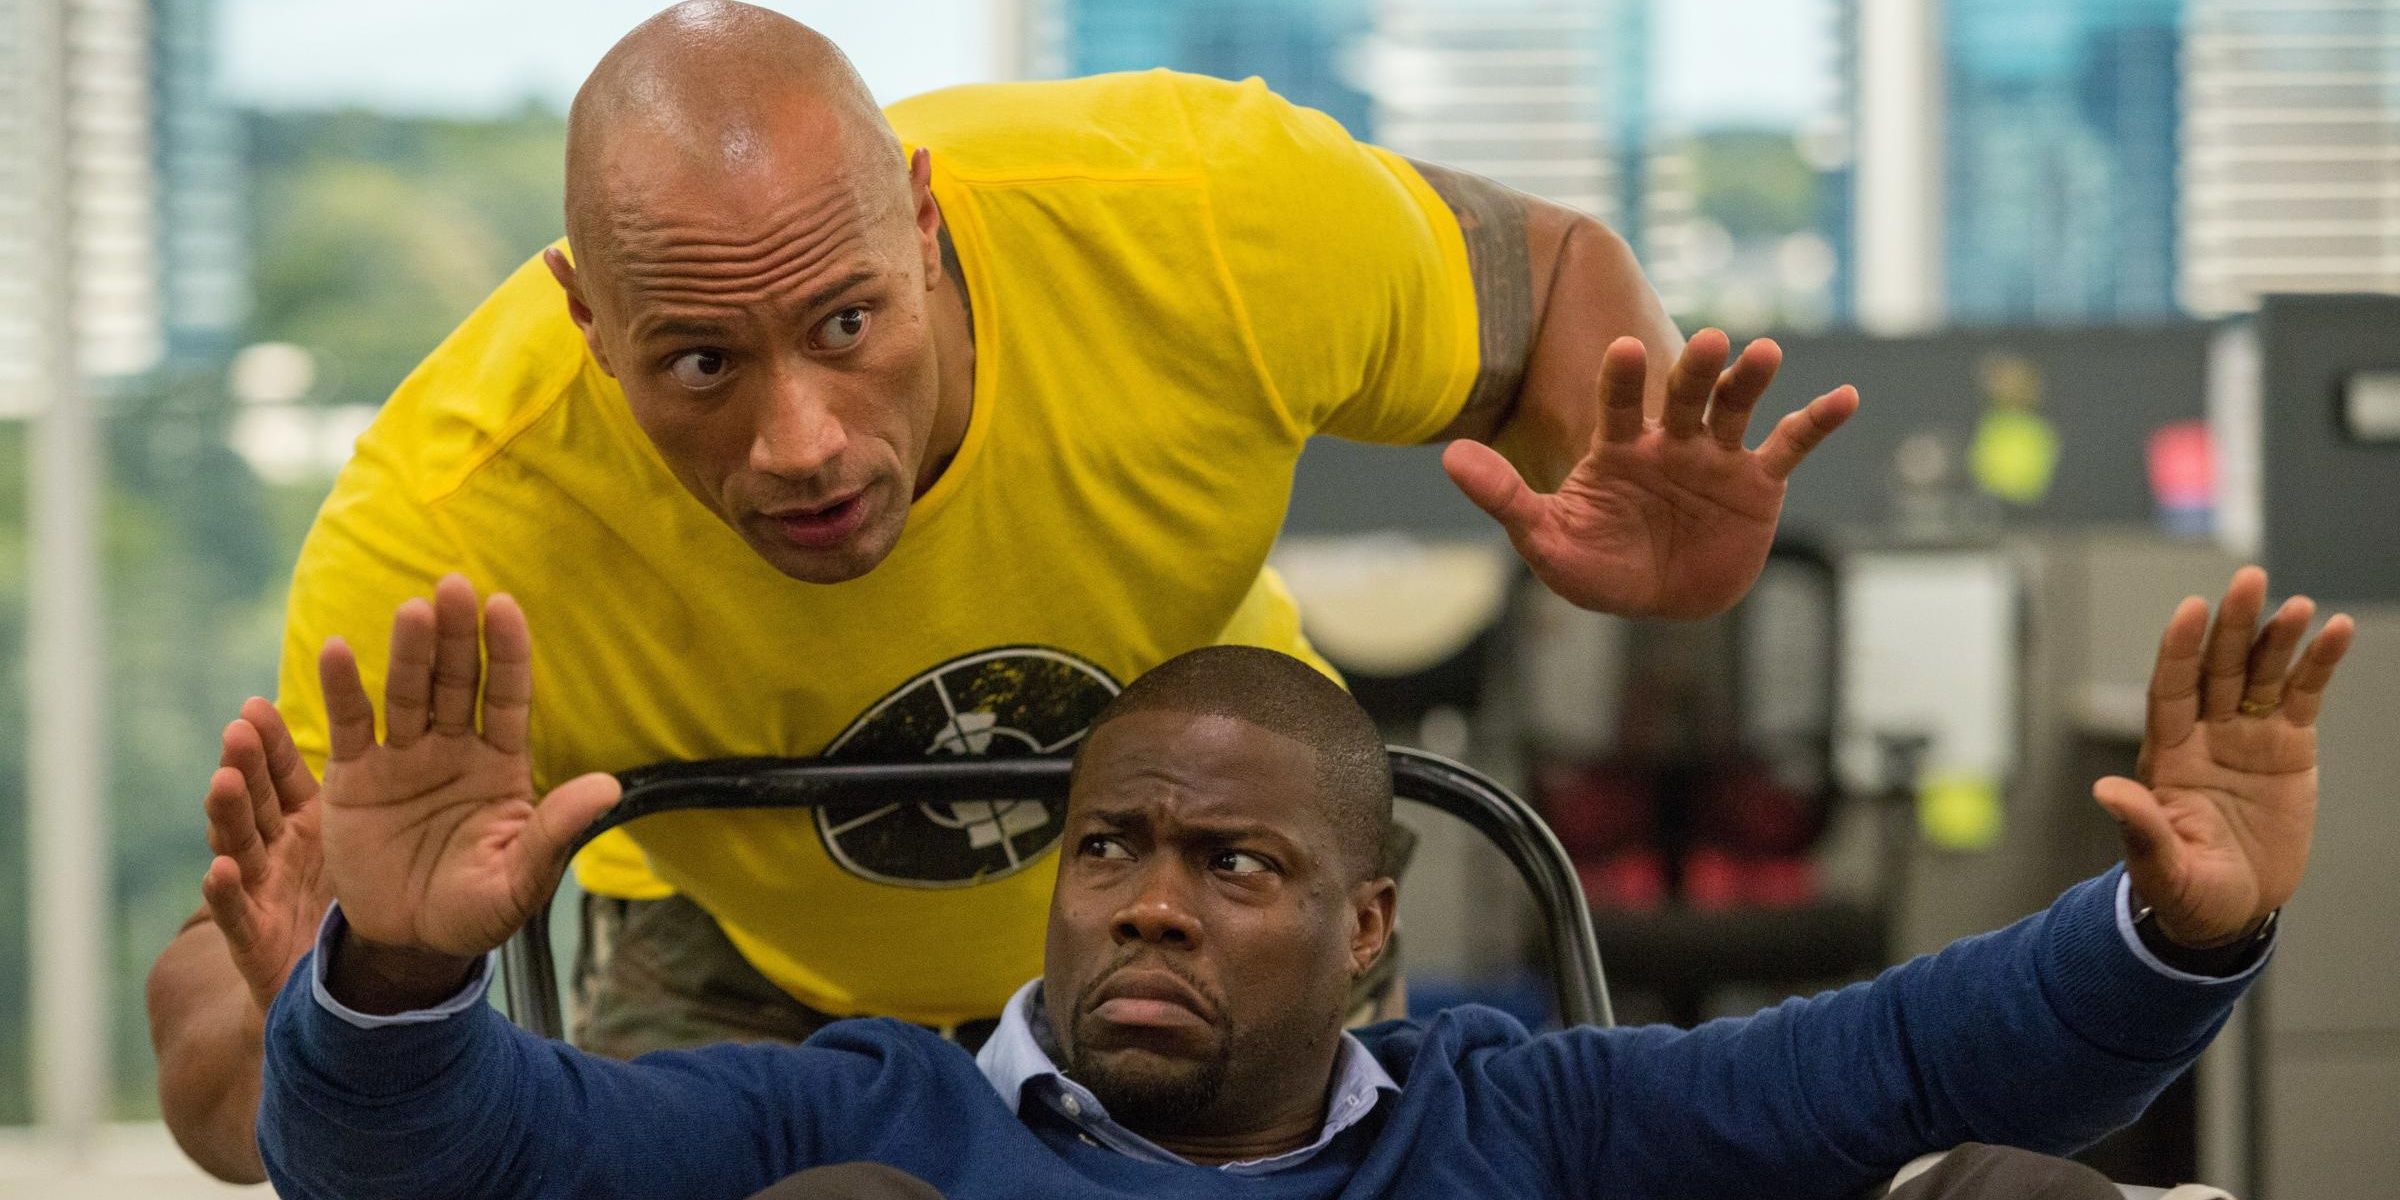 10 Best Kevin Hart Movies (According To Rotten Tomatoes)